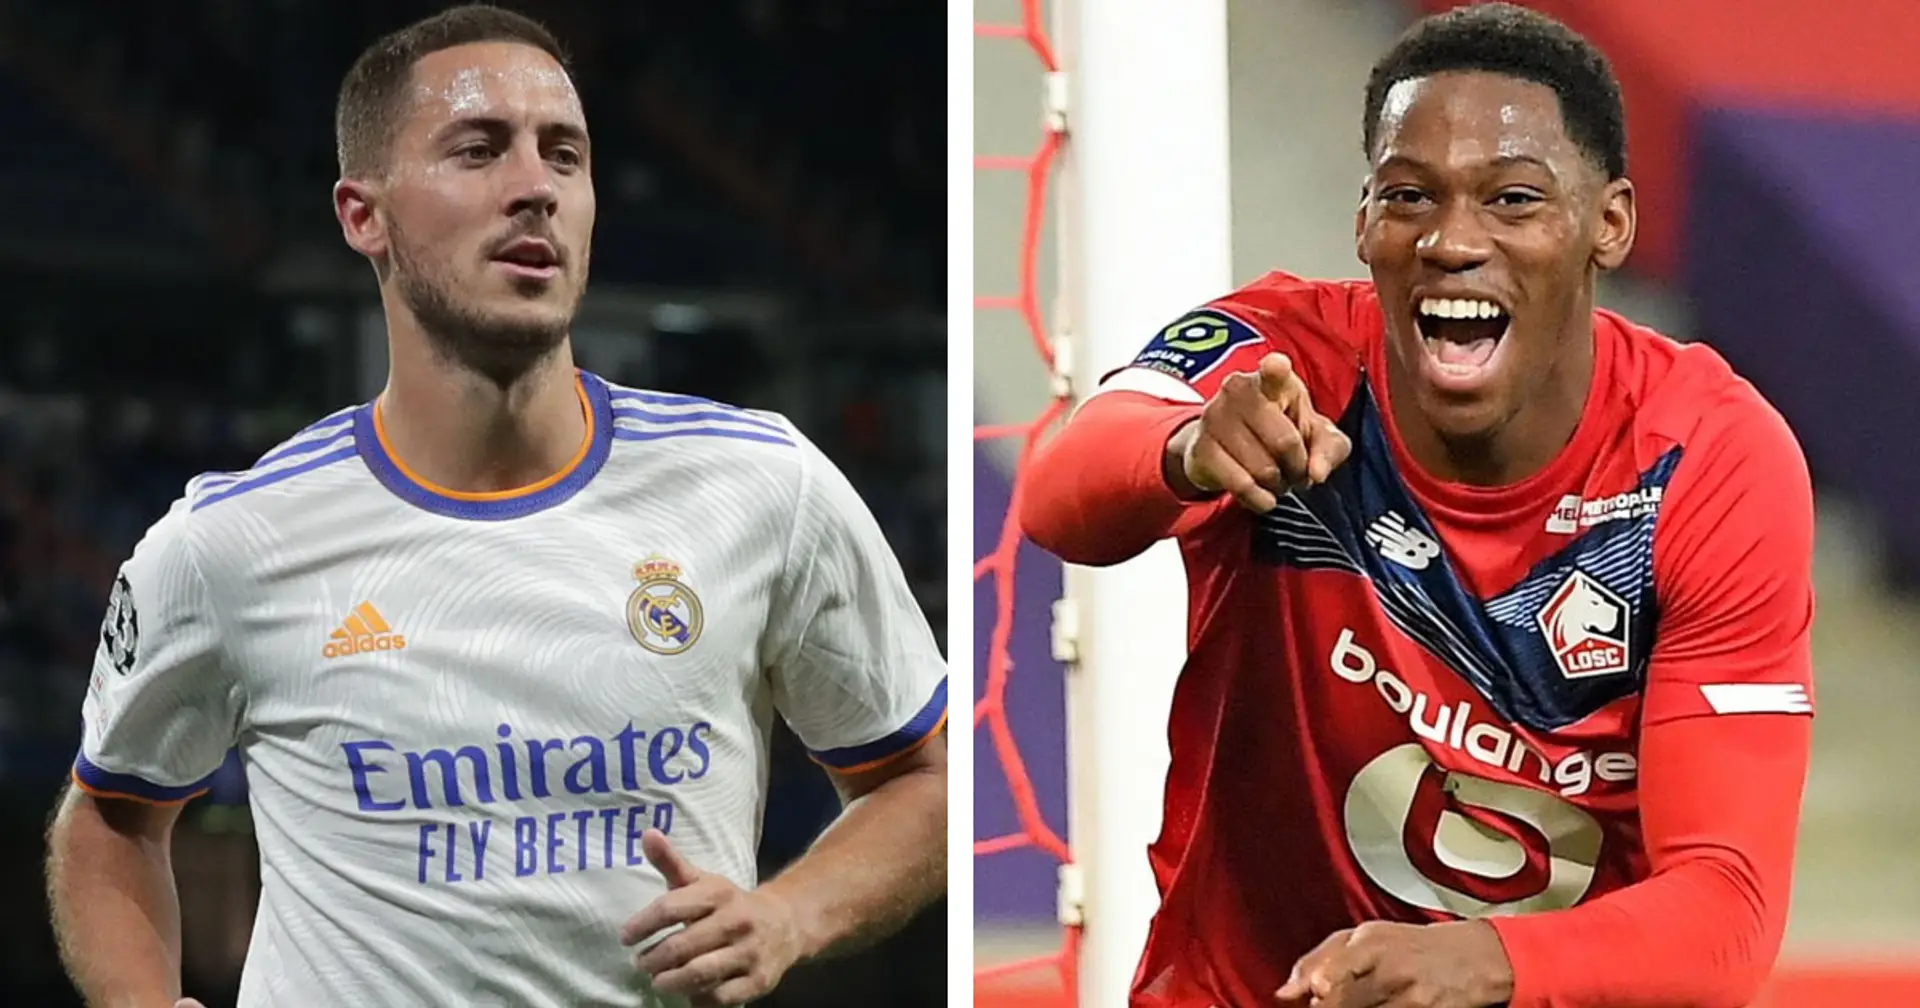 Madrid could include Hazard in deal to sign Lille striker Jonathan David (reliability: 4 stars)